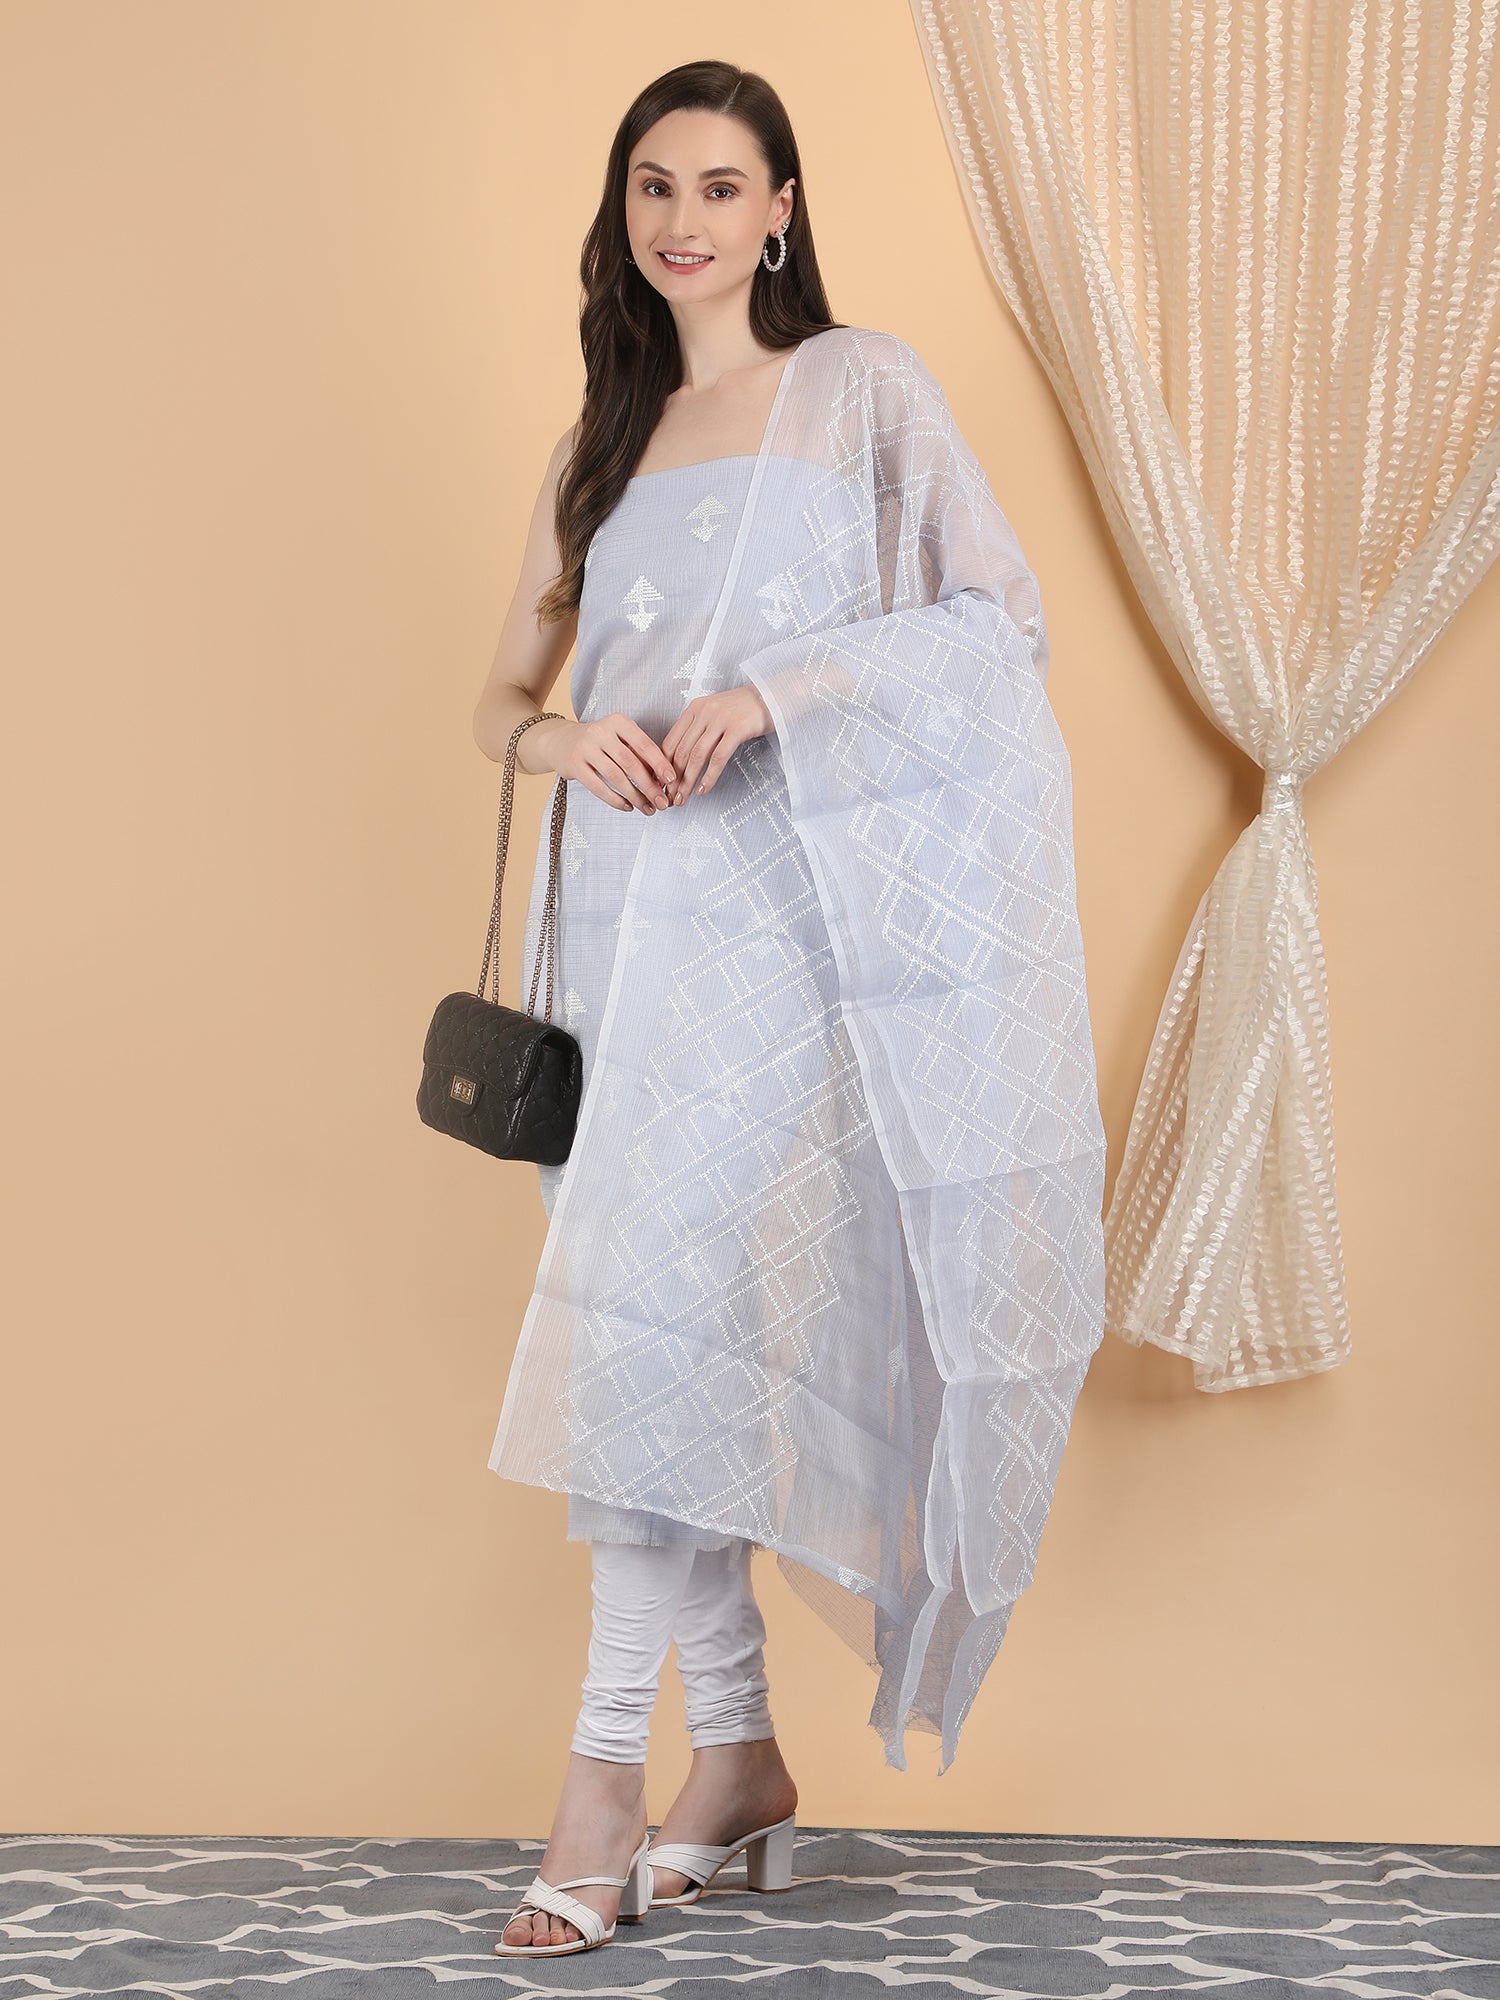 Women's Grey Color and White Embroidery Unstitched Suit and Matching Dupatta set - Kora Doria Cotton, ideal for Summers